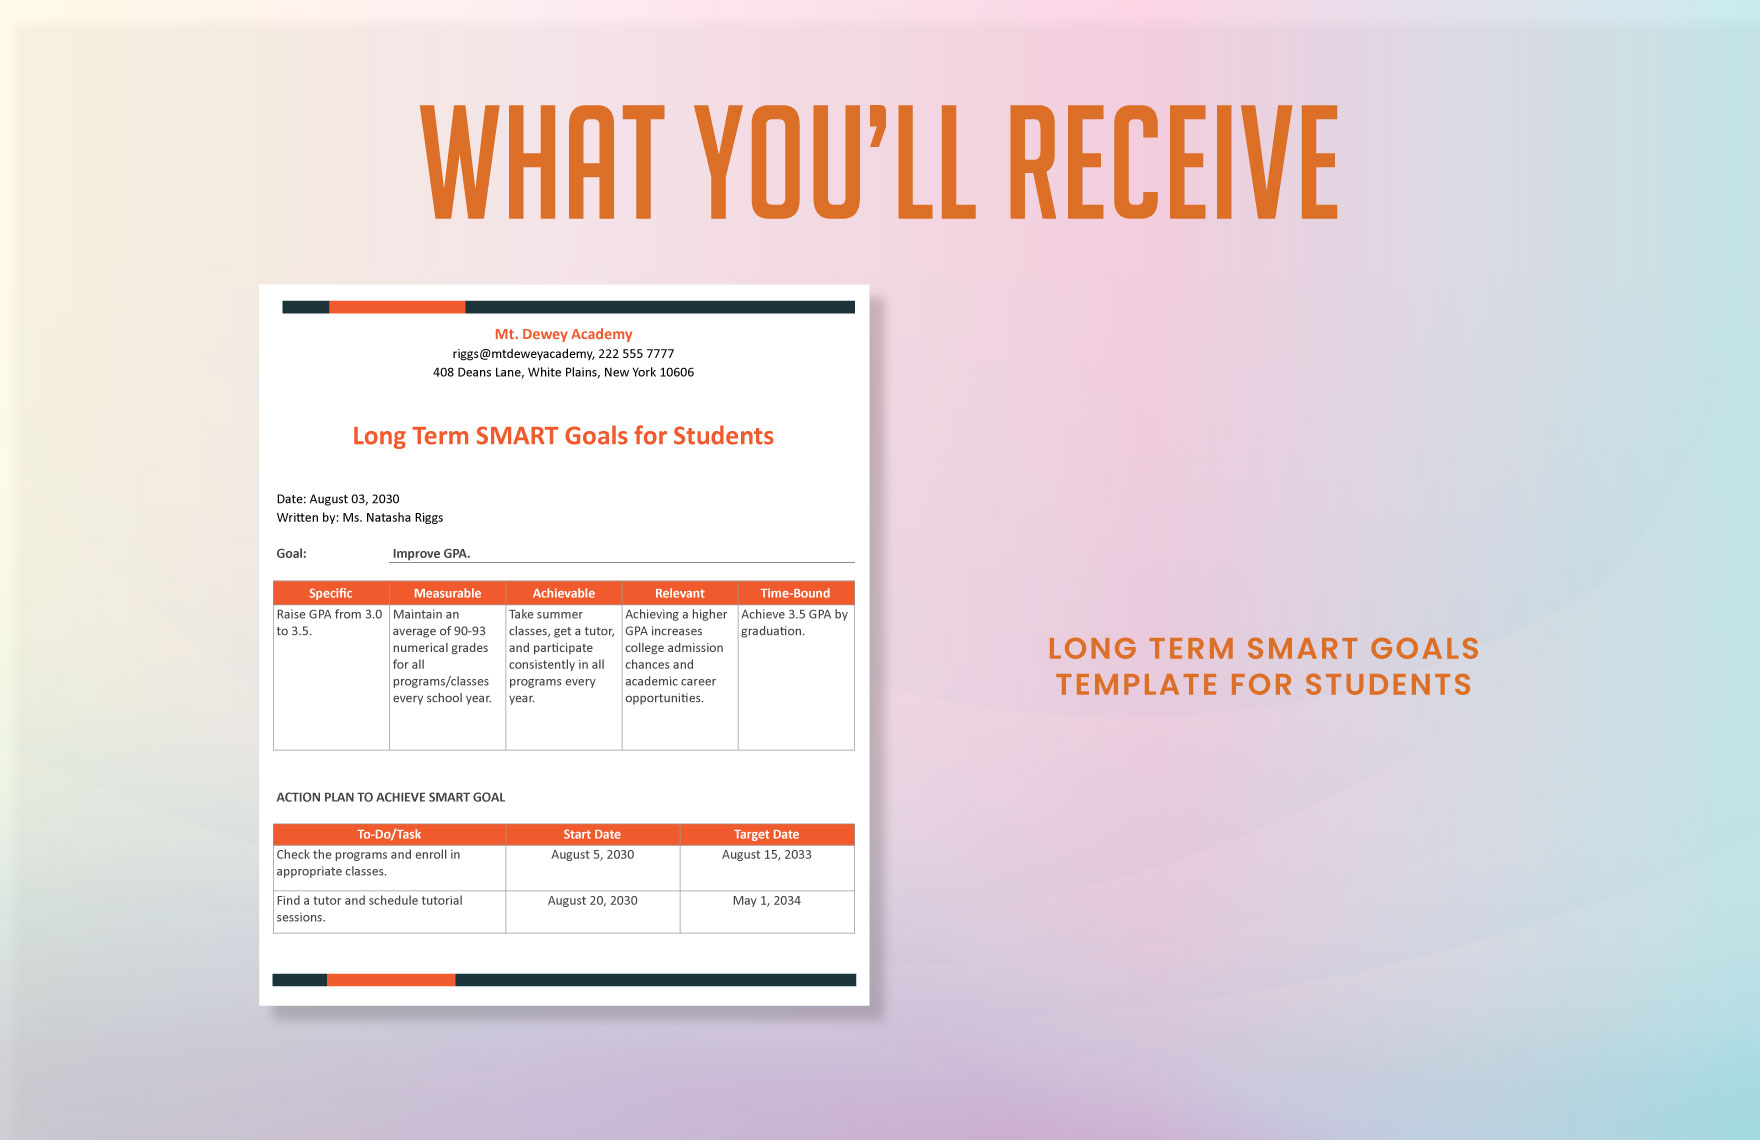 Long Term Smart Goals Template for Students